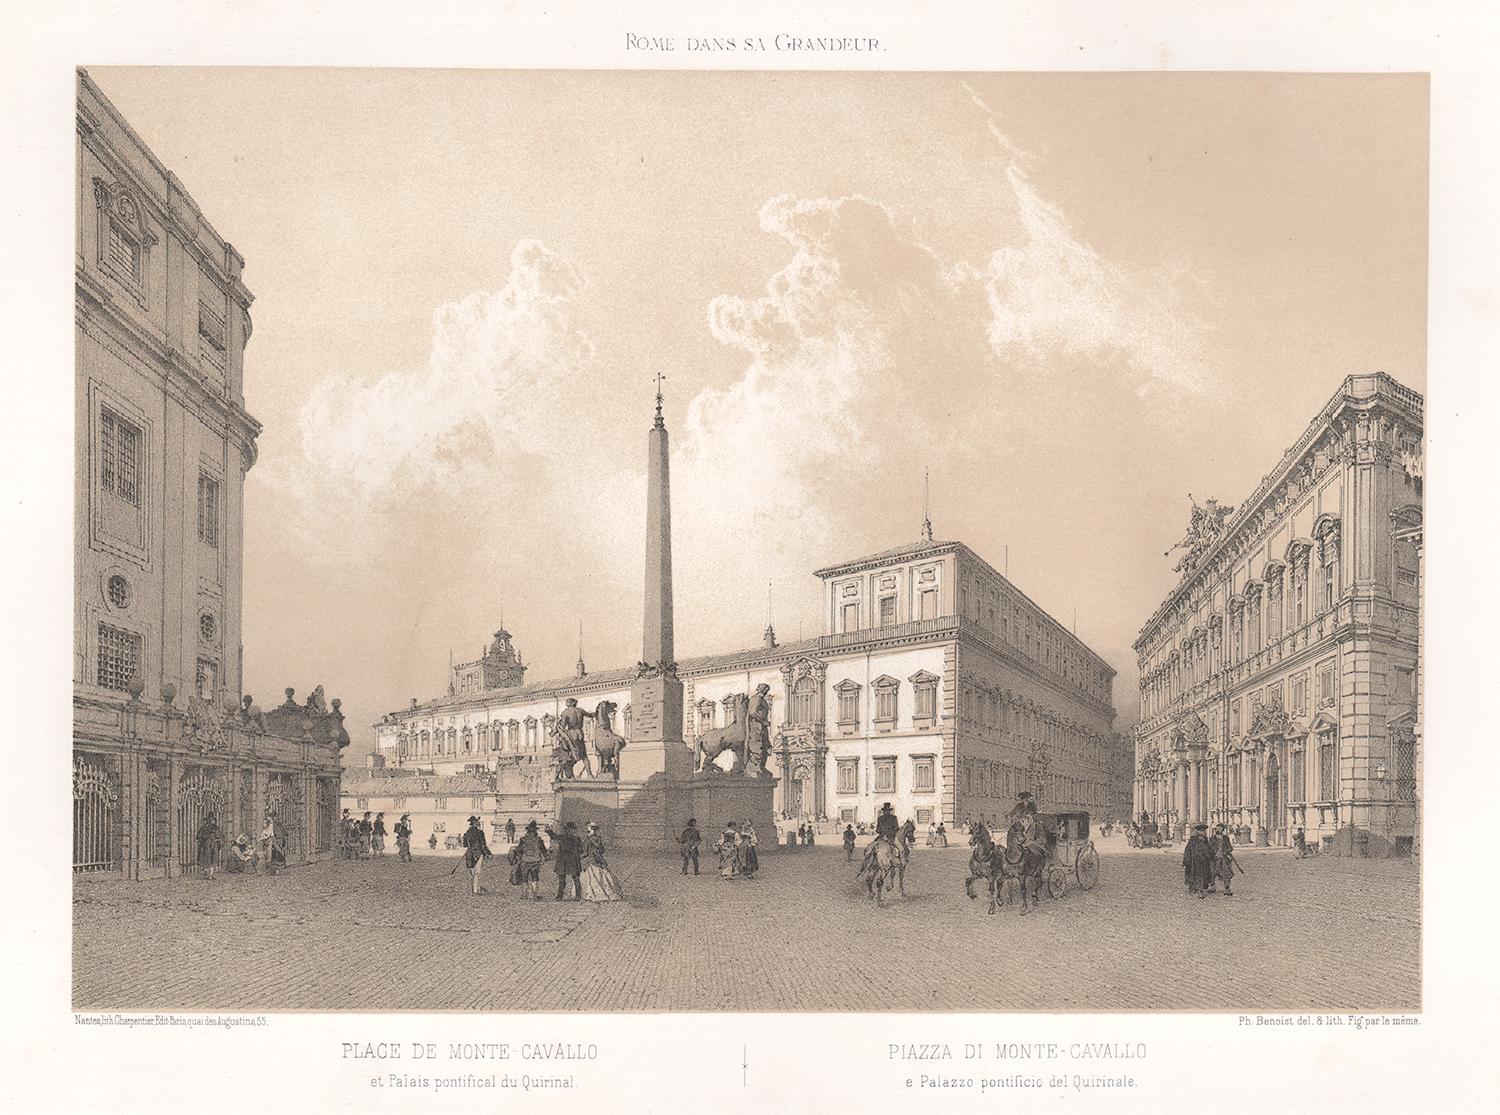 Piazza di Monte Cavallo, Rome, Italy. Tinted lithograph by Philippe Benoist